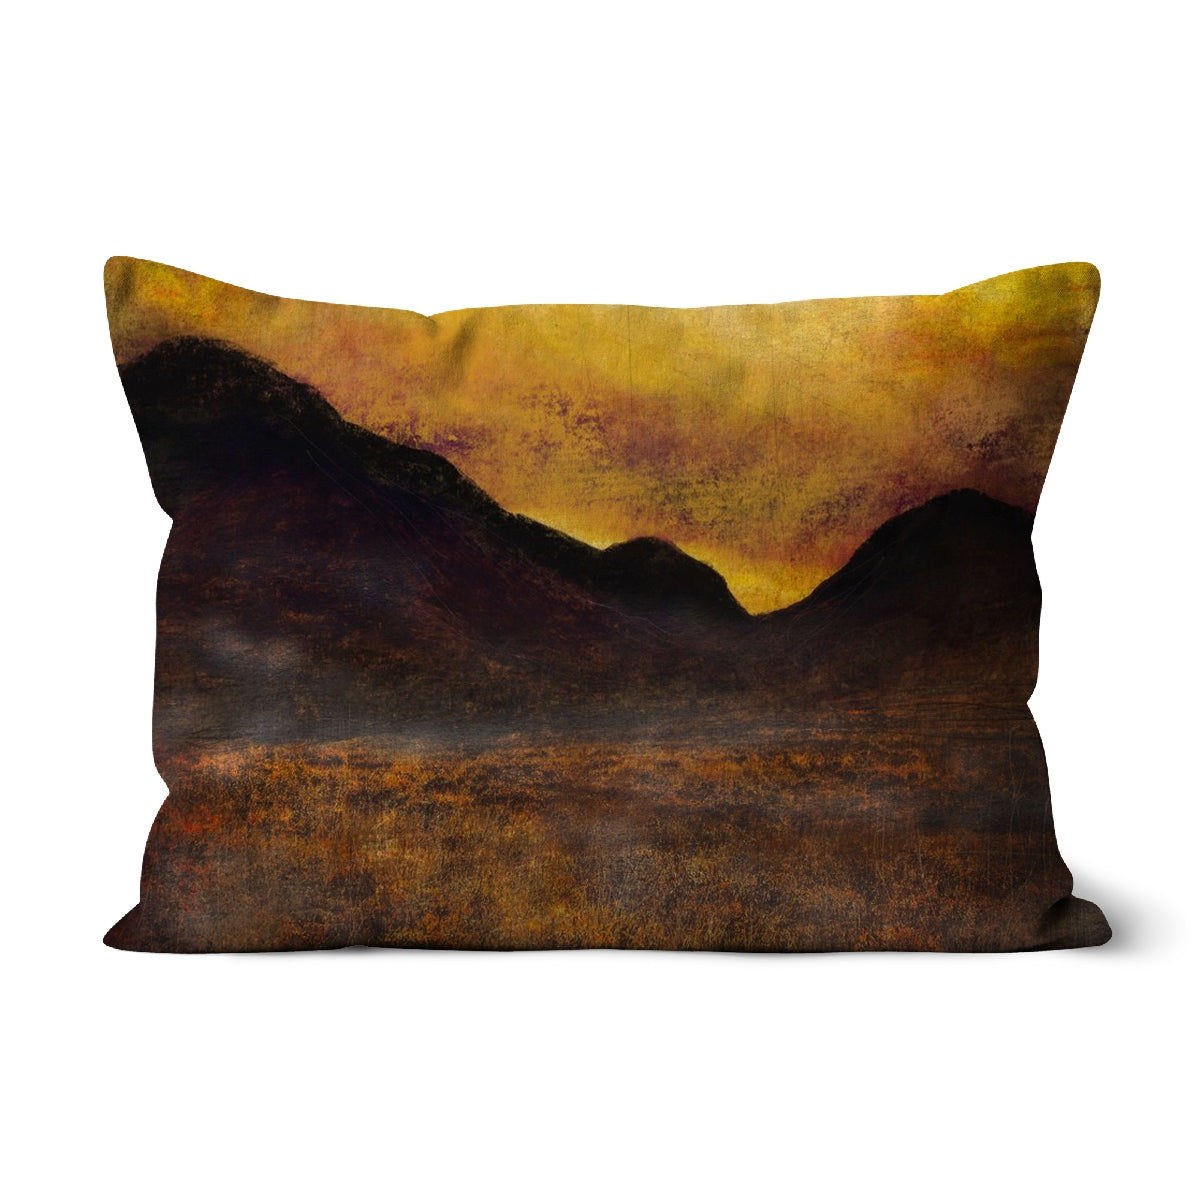 Glencoe Moonlight Art Gifts Cushion-Cushions-Glencoe Art Gallery-Faux Suede-19"x13"-Paintings, Prints, Homeware, Art Gifts From Scotland By Scottish Artist Kevin Hunter